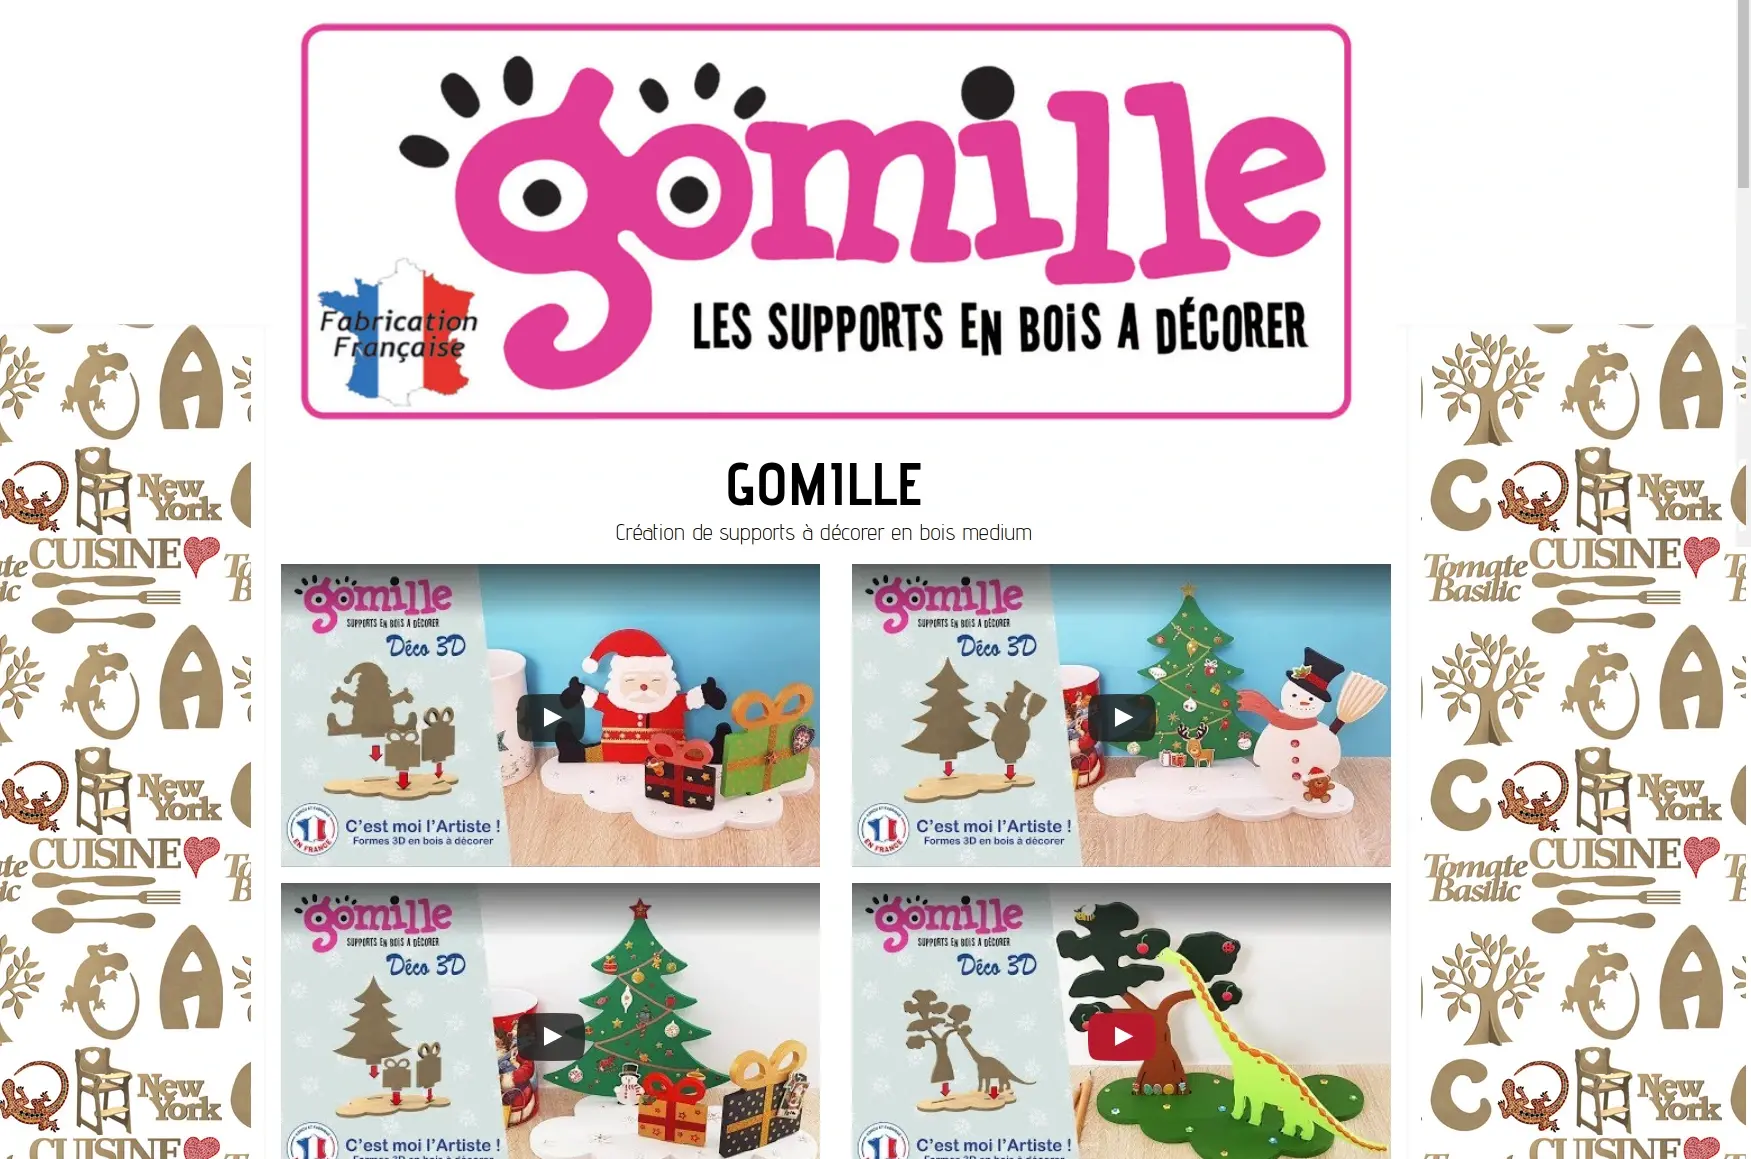 gomille site